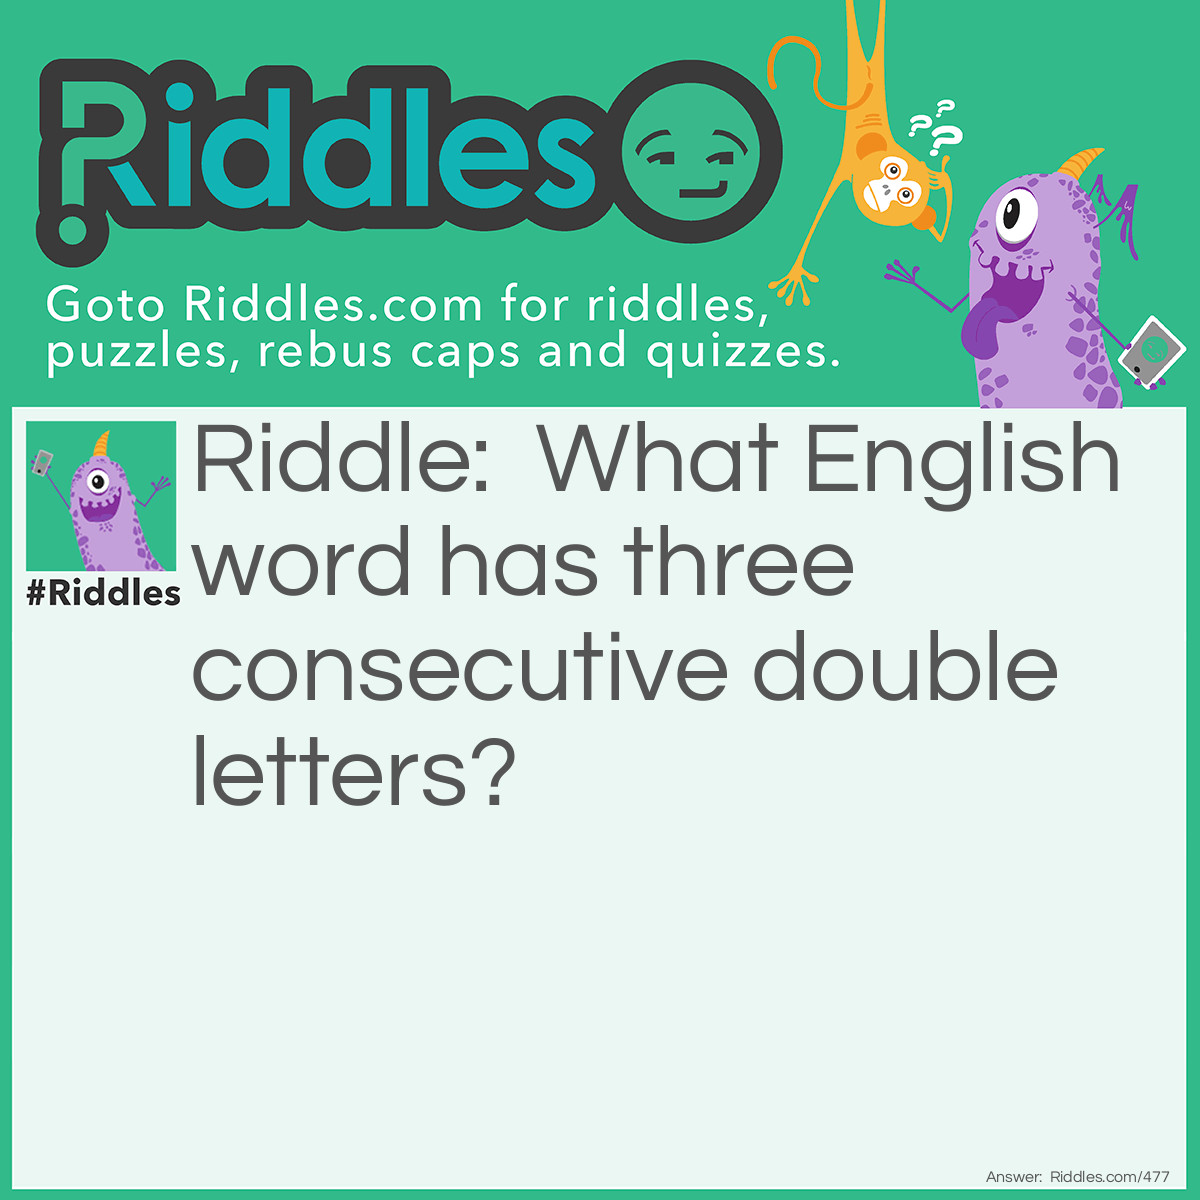 Riddle: What English word has three consecutive double letters? Answer: Bookkeeper.